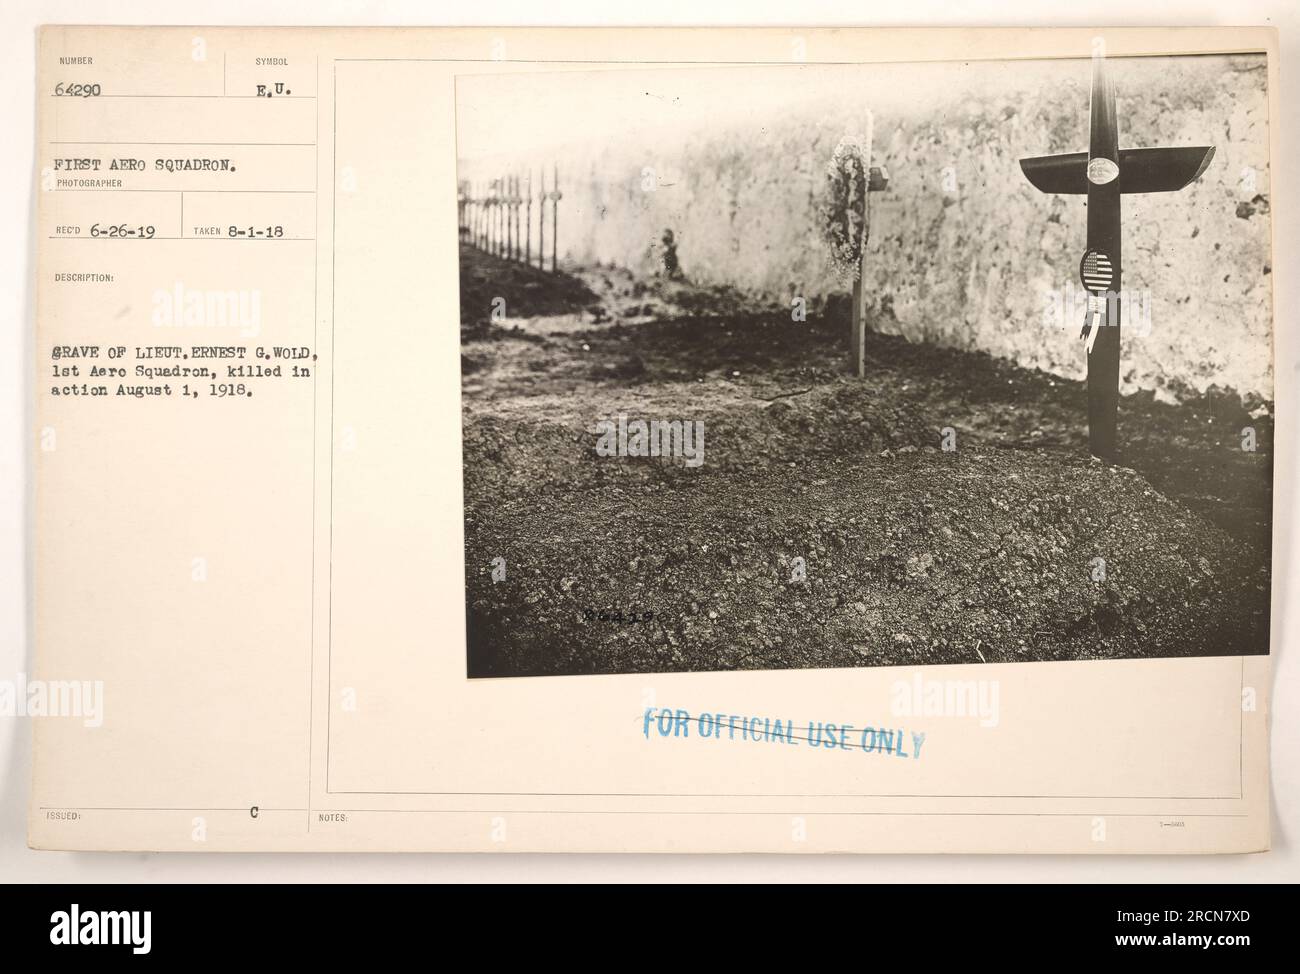 Grave of Lieutenant Ernest G. Wold, member of the 1st Aero Squadron who was killed in action on August 1, 1918. The photograph was taken on August 1, 1918 and is marked with the symbol 'RECO 6-26-19.' European Union issued grave. Notes on the photograph are marked as 'For Official Use Only.' Stock Photo